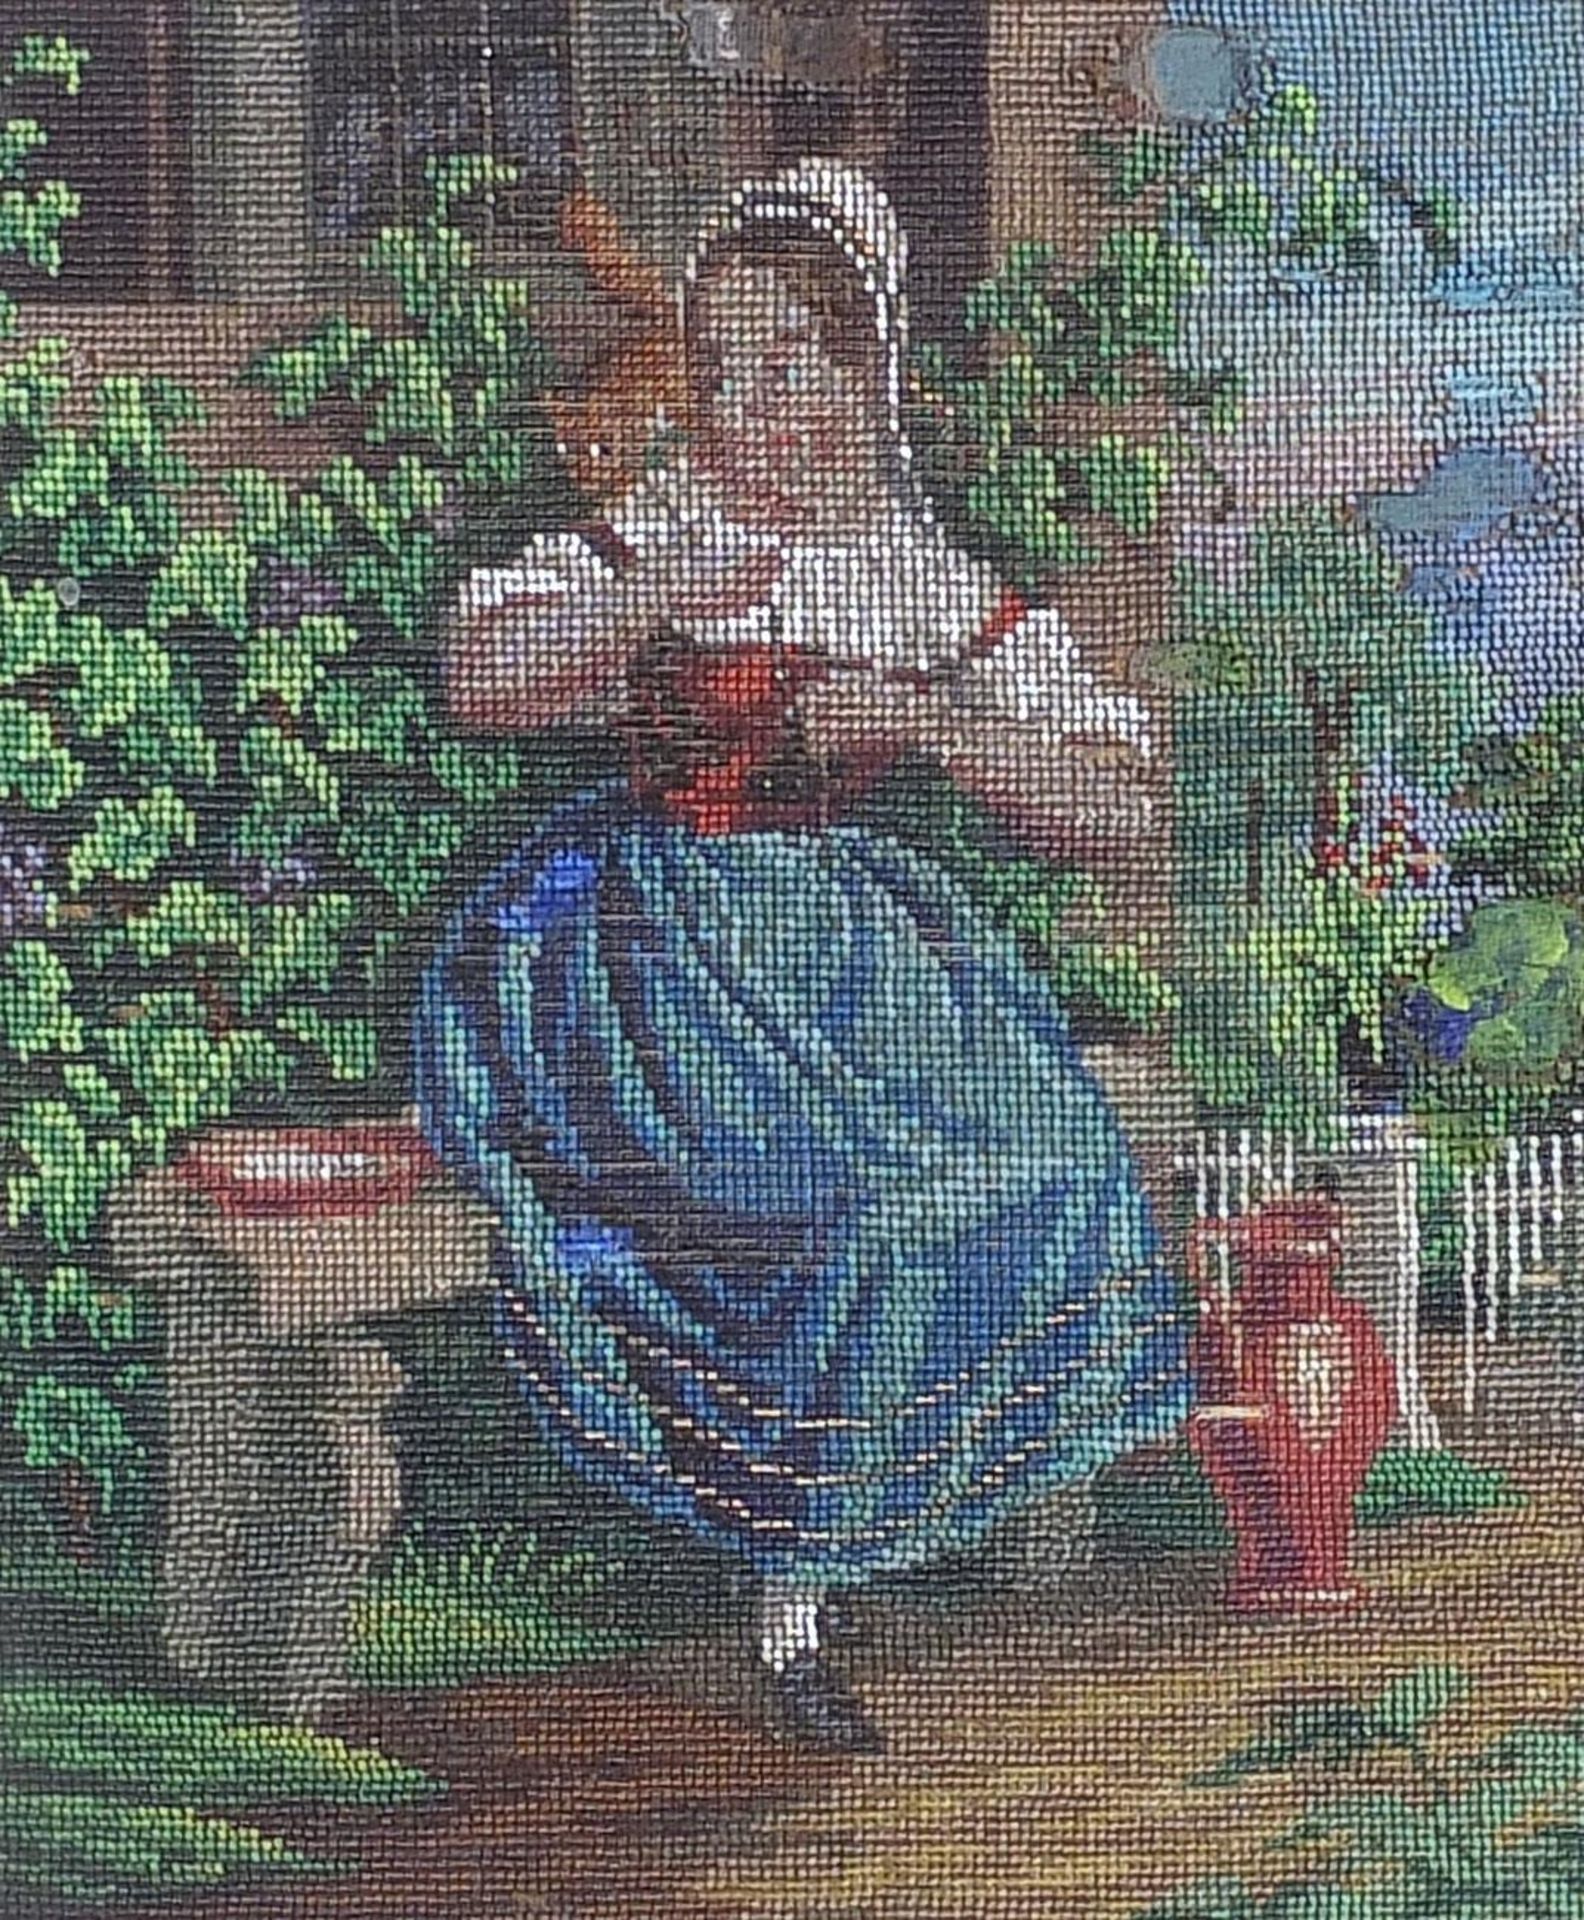 Girl with cat, 19th century beadwork panel, mounted, framed and glazed, 20cm x 16.5cm excluding - Image 2 of 6